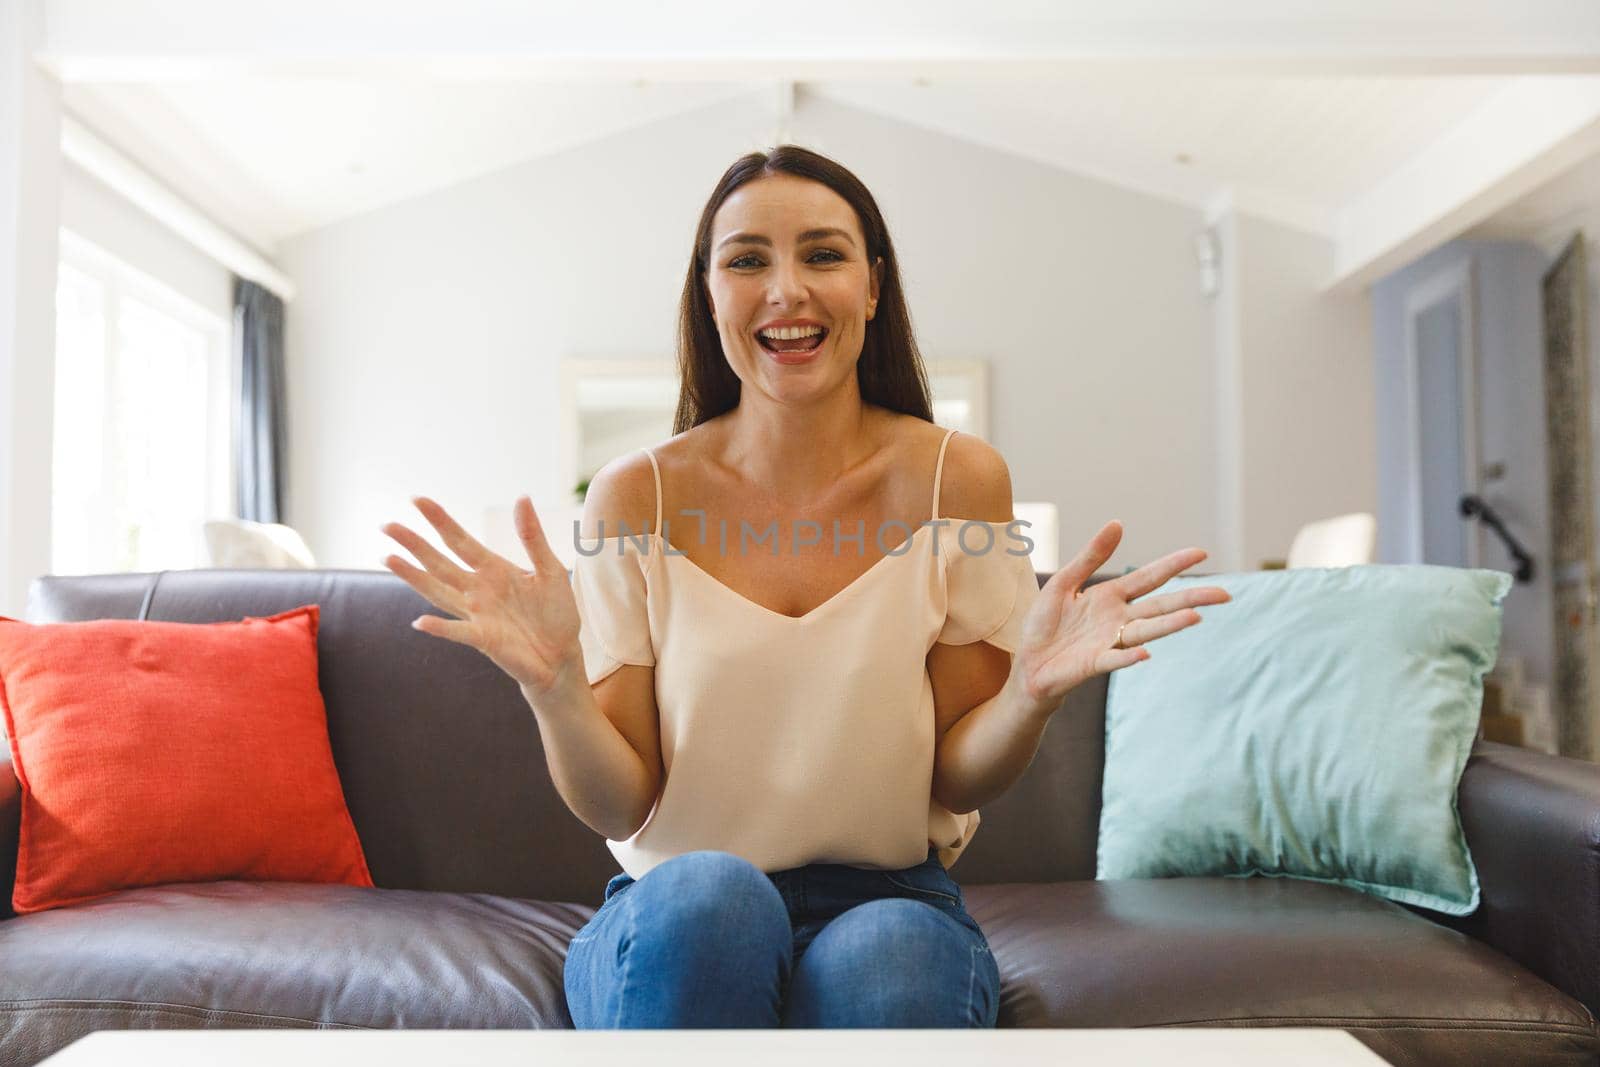 Happy caucasian woman sitting on couch having video call in living room, talking and gesturing. keeping in touch, leisure time at home with communication technology.